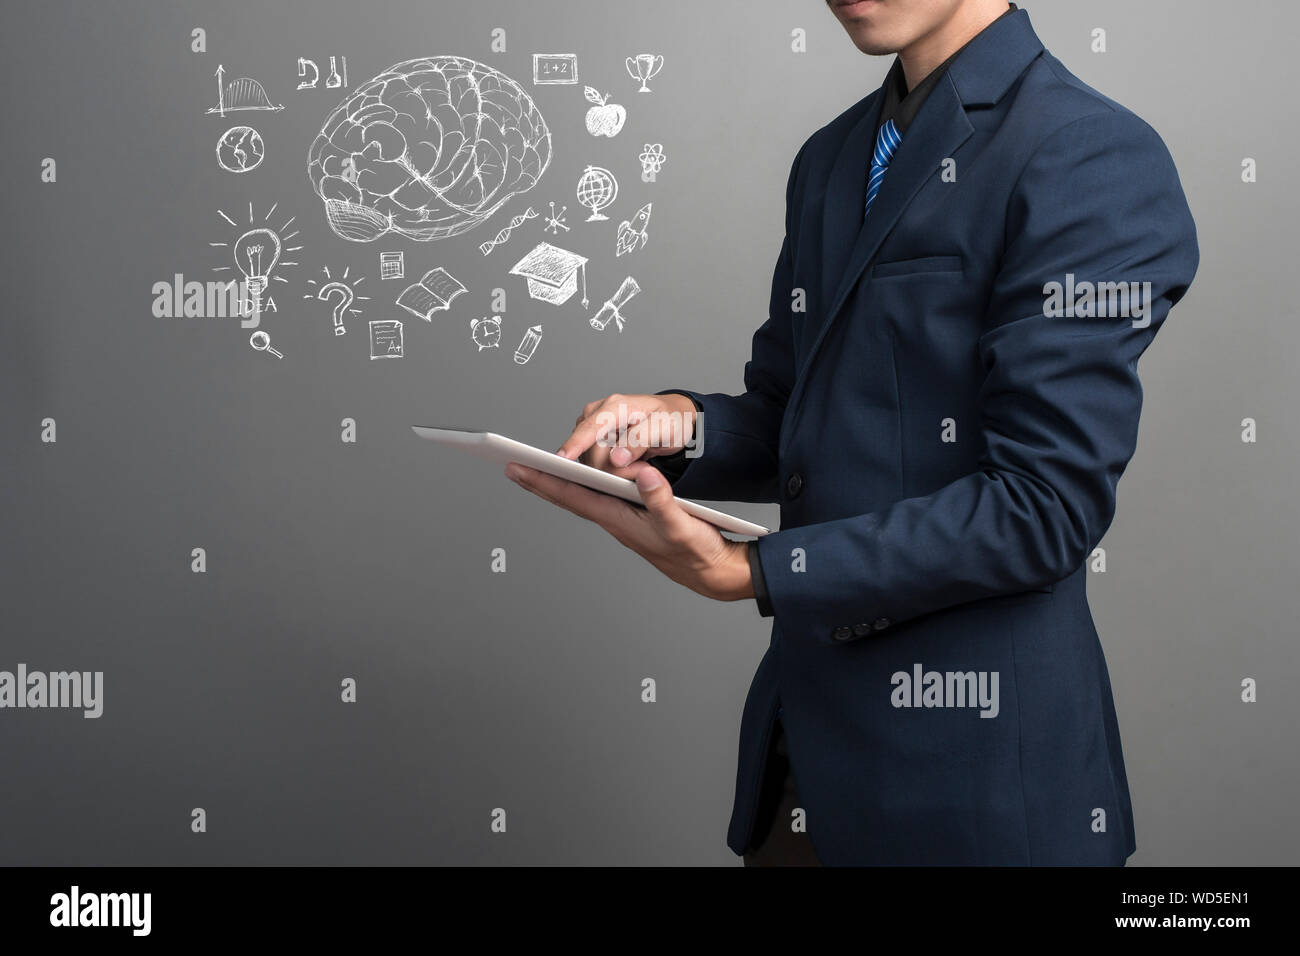 Digitally Generated Image Of Businessman Working On Tablet Against Gray Background Stock Photo